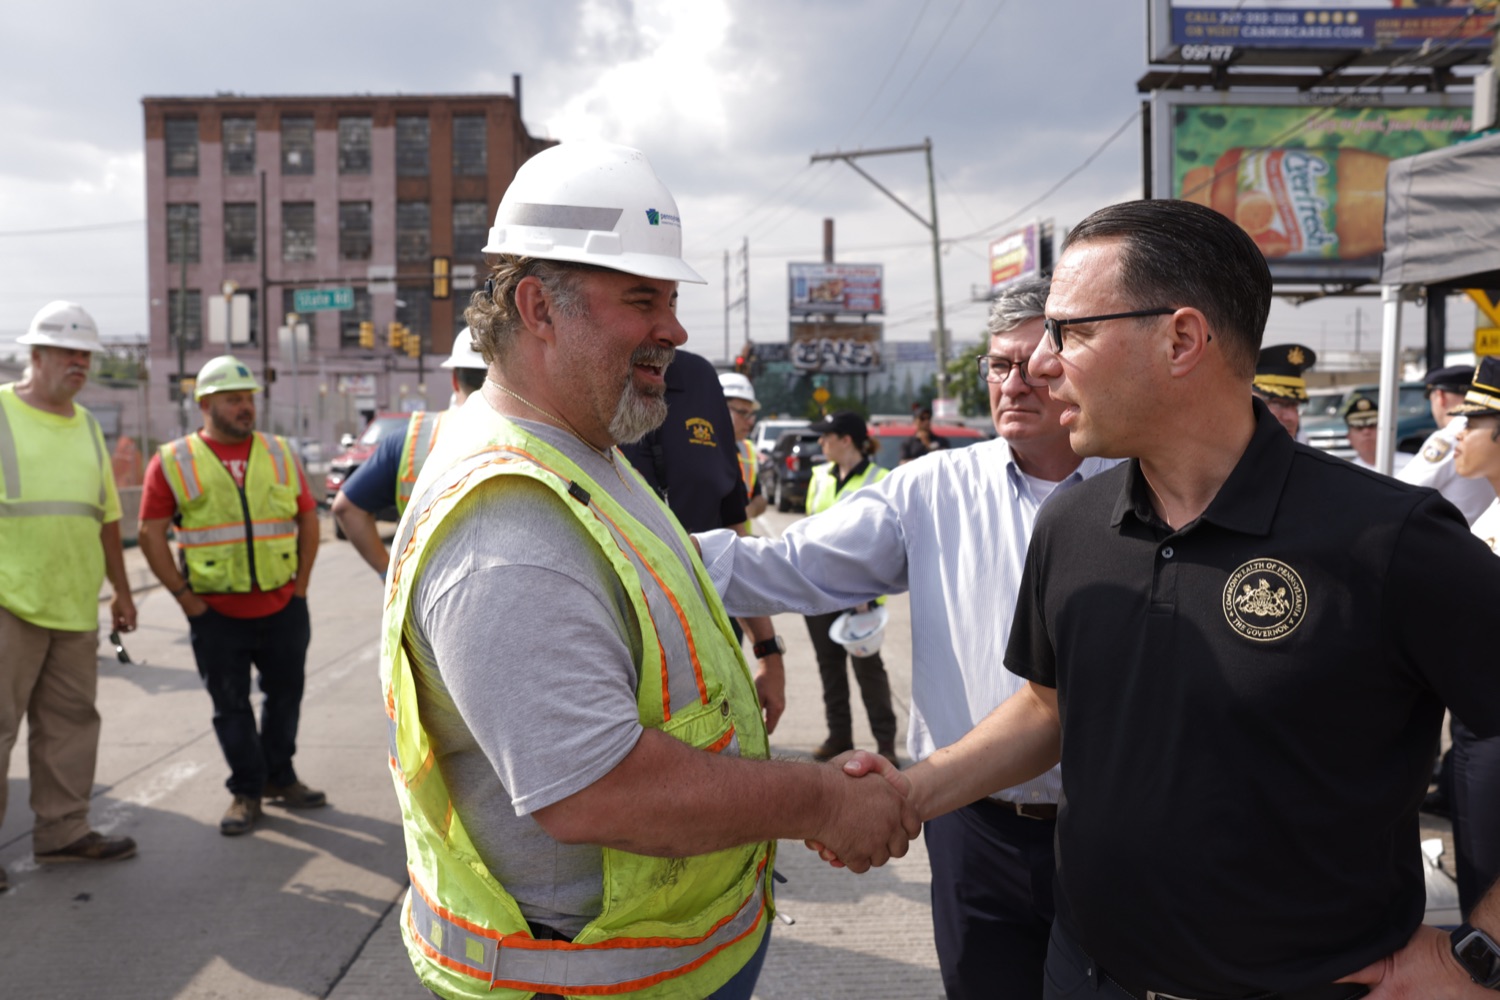 Governor Josh Shapiro speaks with workers on location.  Governor Josh Shapiro, along with officials from the Shapiro Administration, the City of Philadelphia, and SEPTA provided an update on the response to the vehicle fire on the Route 73/Cottman Avenue ramp under Interstate 95 in Philadelphia, which caused the roadway in this area to partially collapse, and heavily damaged the southbound structure. The interstate is closed in both directions..."Interstate 95 is a critical artery that supports our economy and plays an important role in Pennsylvanians' day to day lives. My Administration is all hands on deck to repair this safely and as efficiently as possible," said Governor Shapiro. "We will rebuild and recover - and in the meantime, we will make sure people can get to where they need to go safely."..This morning, according to first responders in Philadelphia and the Pennsylvania State Police, at approximately 6:20am, a vehicle fire under I-95 near the Cottman Avenue exit in Northeast Philadelphia caused a portion of the highway to collapse. Preliminary reports indicate a commercial truck carrying a petroleum-based product was the source of the fire. Since the crash occurred, PEMA has also been on-site, coordinating response efforts with local and federal partners.  JUNE 11, 2023 - PHILADELPHIA, PA.<br><a href="https://filesource.amperwave.net/commonwealthofpa/photo/23248_gov_I95Collapse_dz_012.JPG" target="_blank">⇣ Download Photo</a>